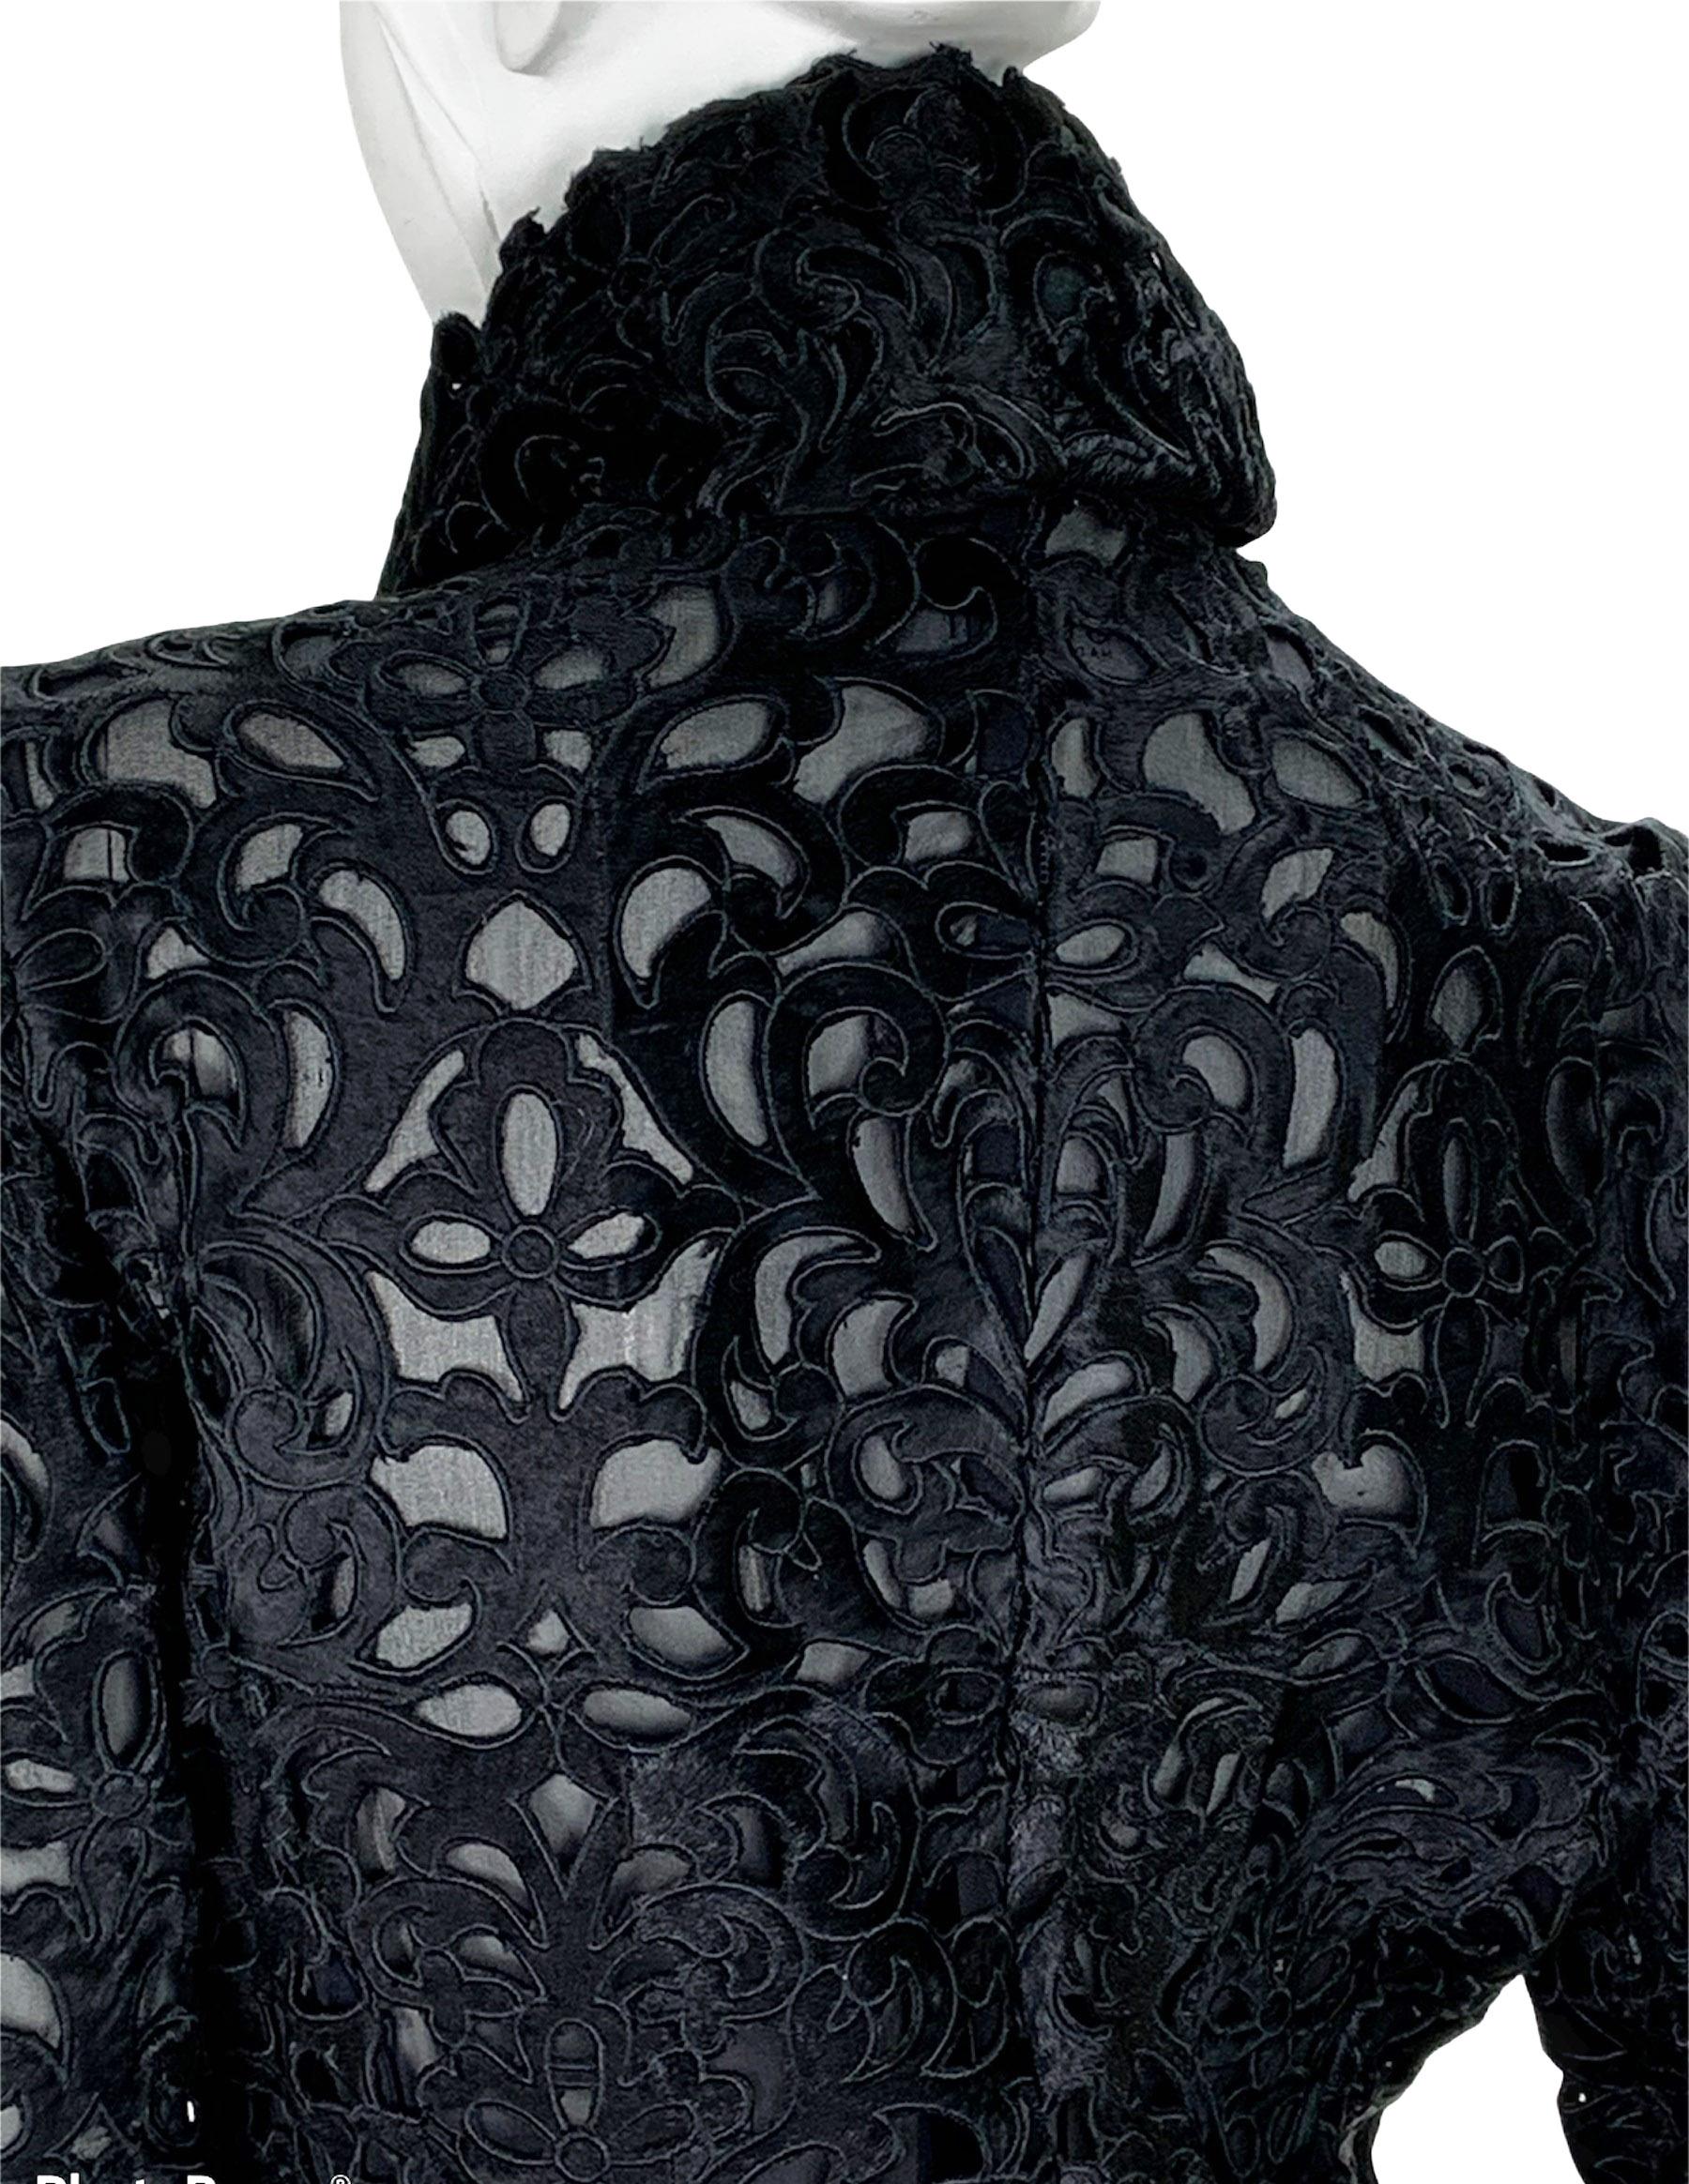 New Tom Ford for Gucci 2004 Collection Black Lamb Fur Laser Cut Jacket 42 - US 6 For Sale 2